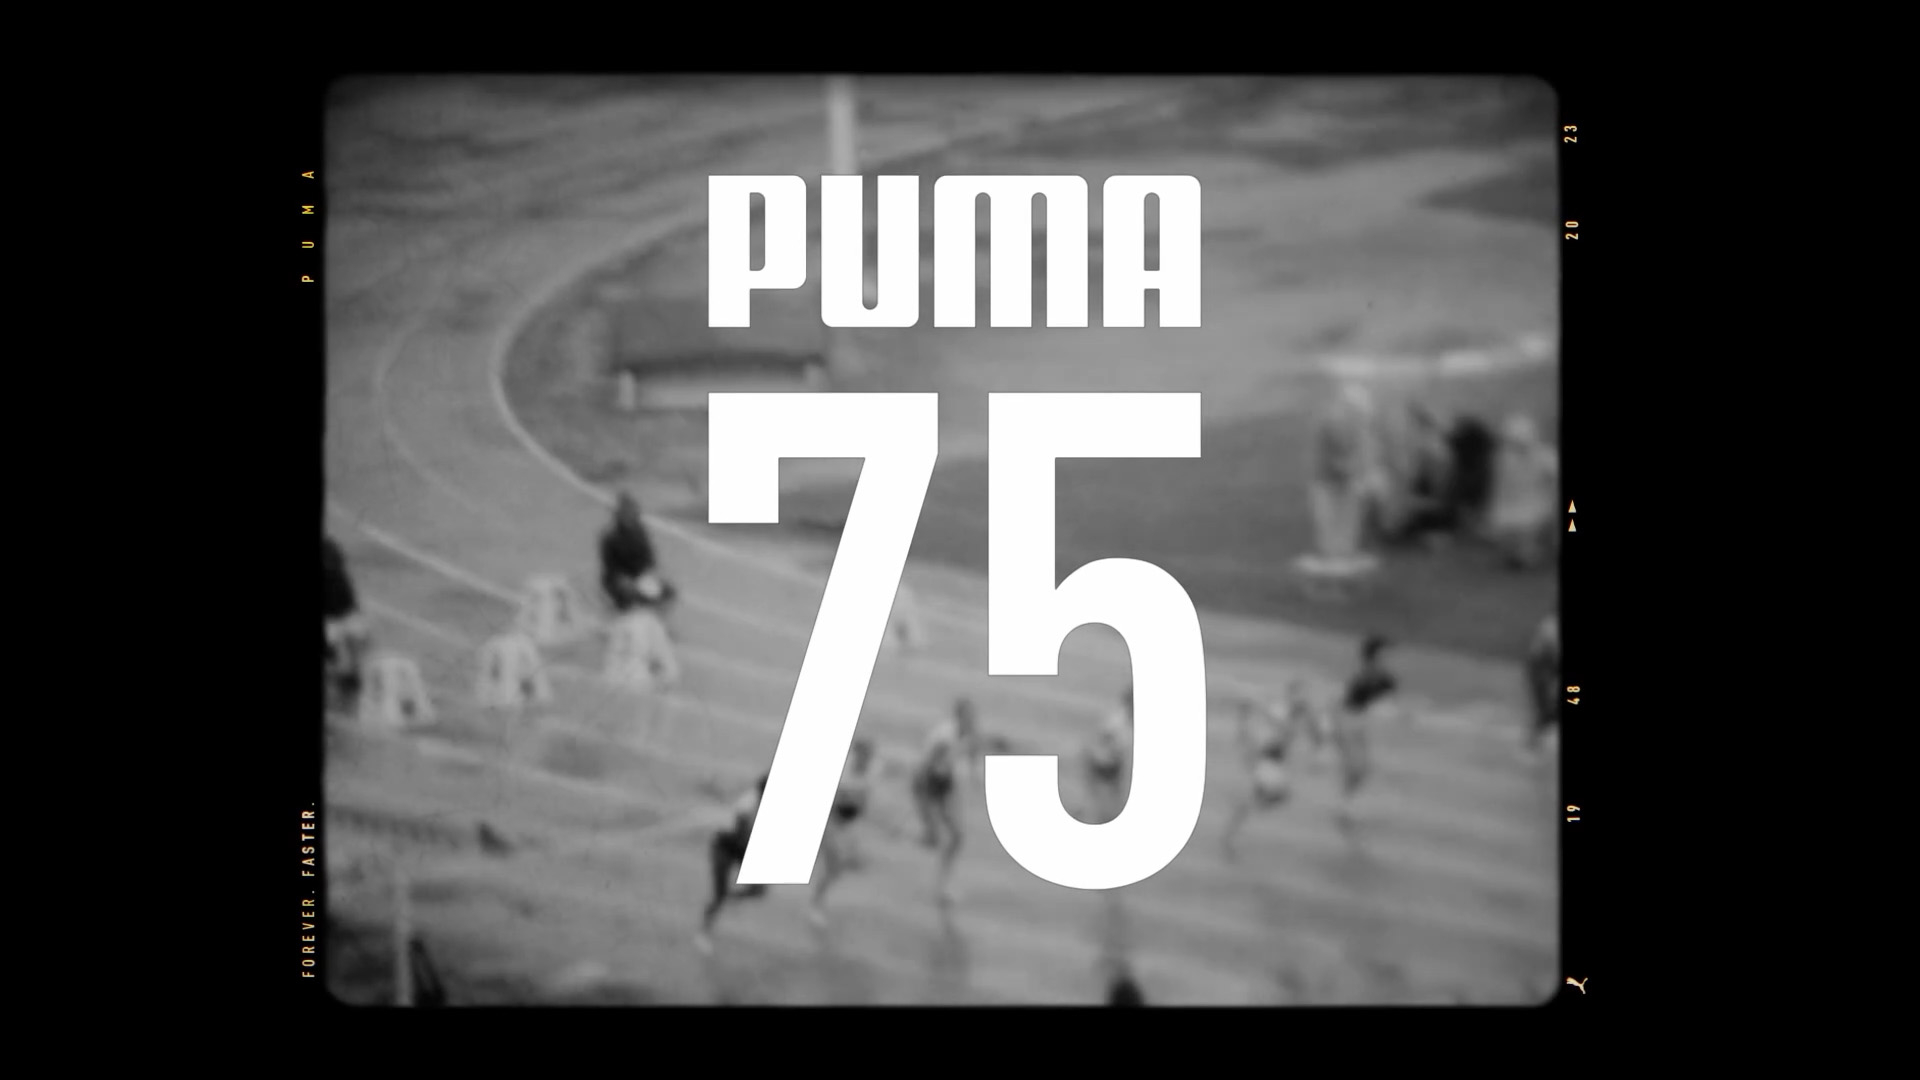 Sports company PUMA will turn 75 in 2023 and will celebrate its milestones in sports, culture and innovation with a series of events throughout the year which will elaborate on its mantra ‘Forever Faster’.